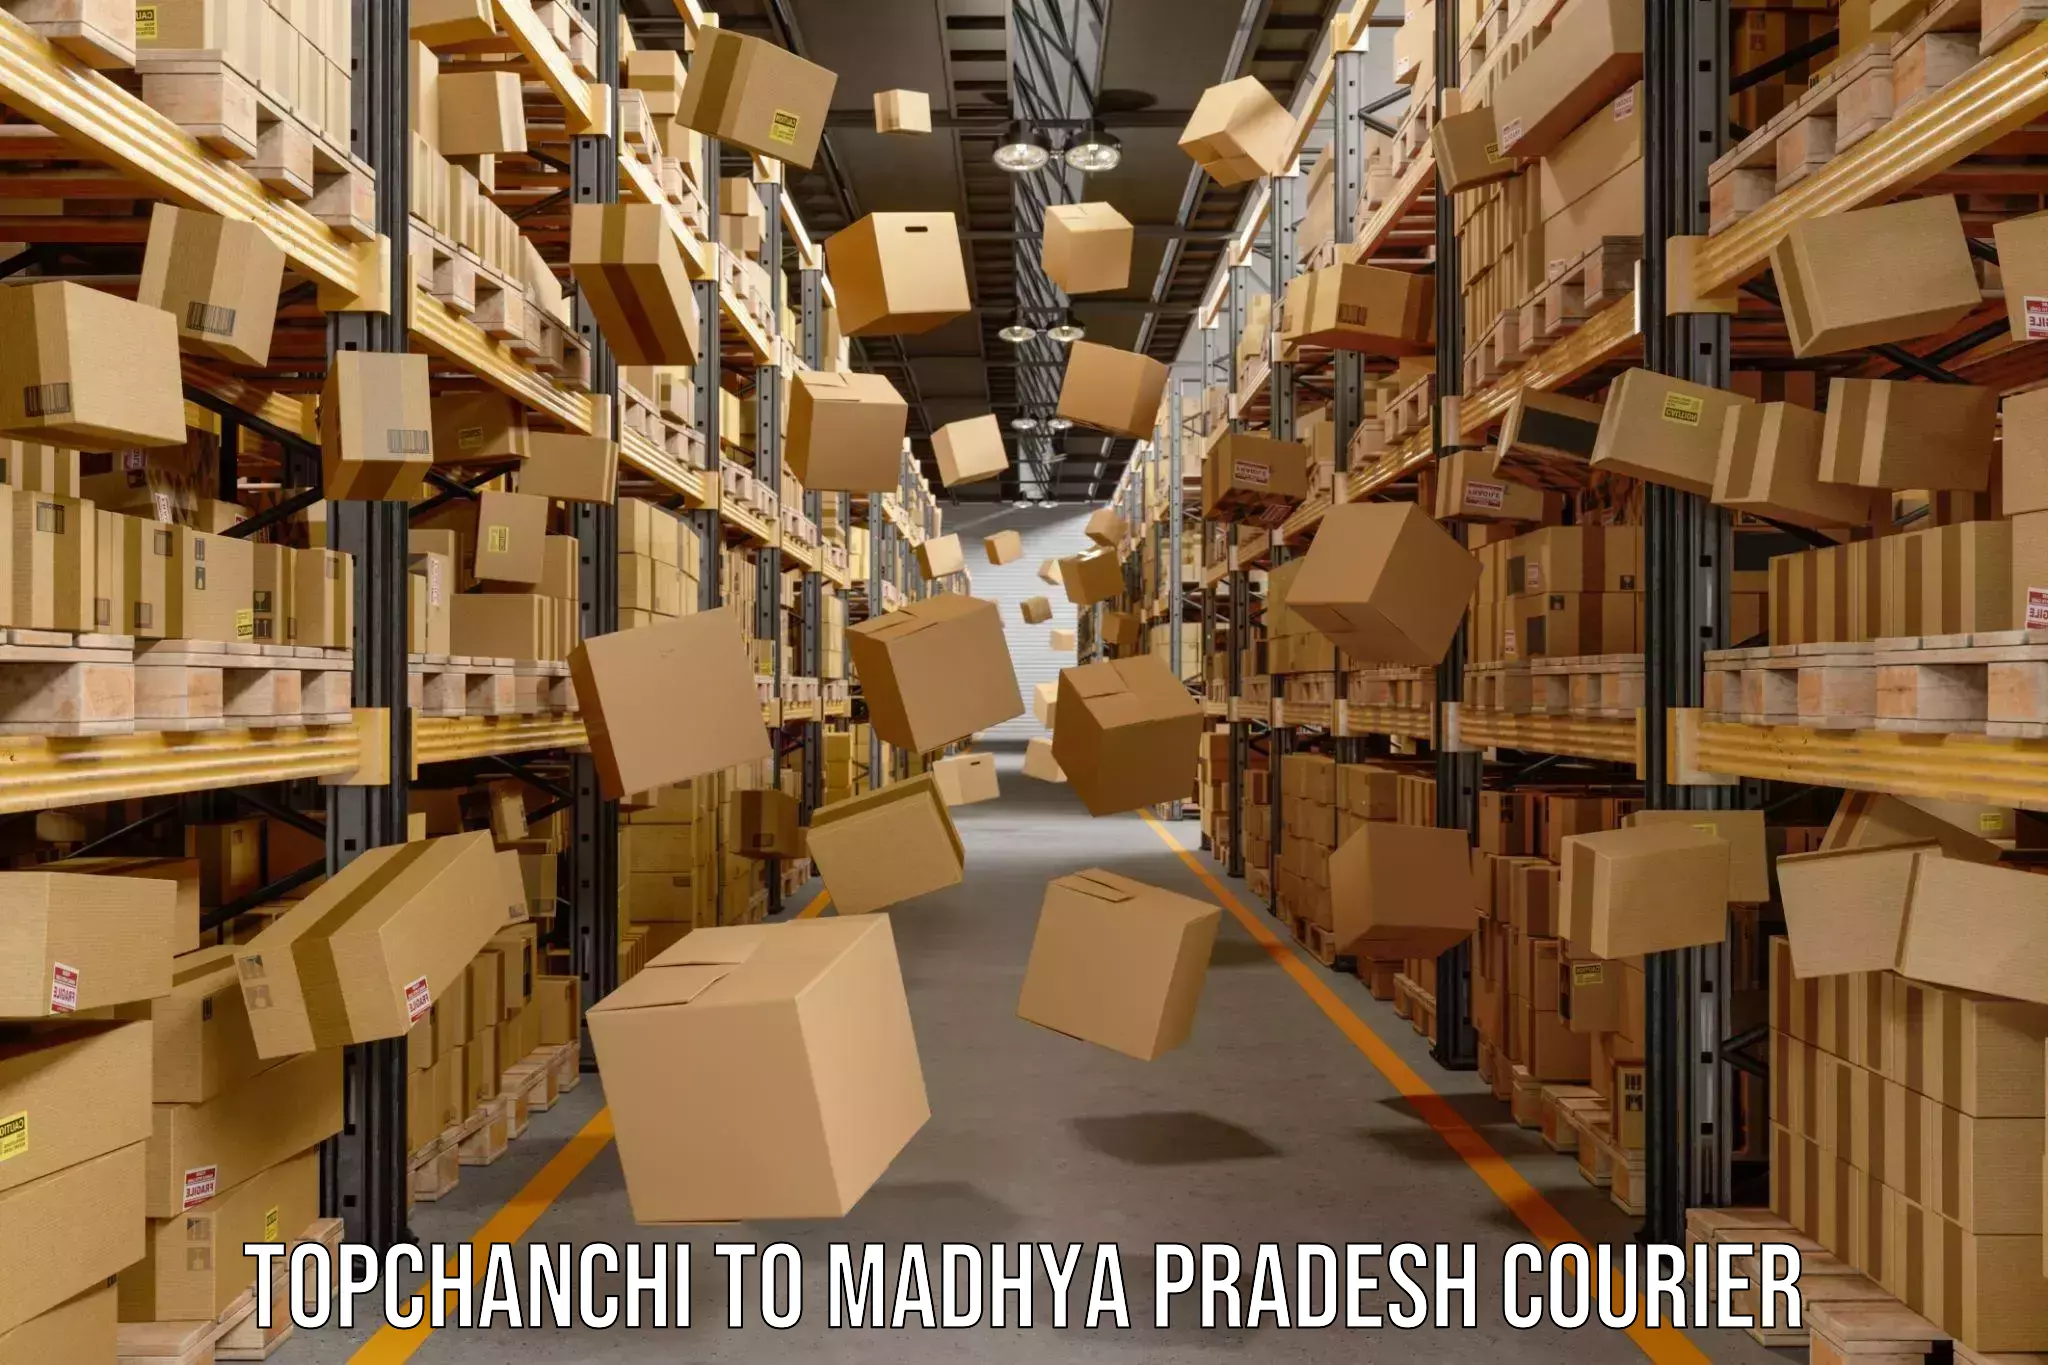 Global delivery options Topchanchi to IIIT Bhopal